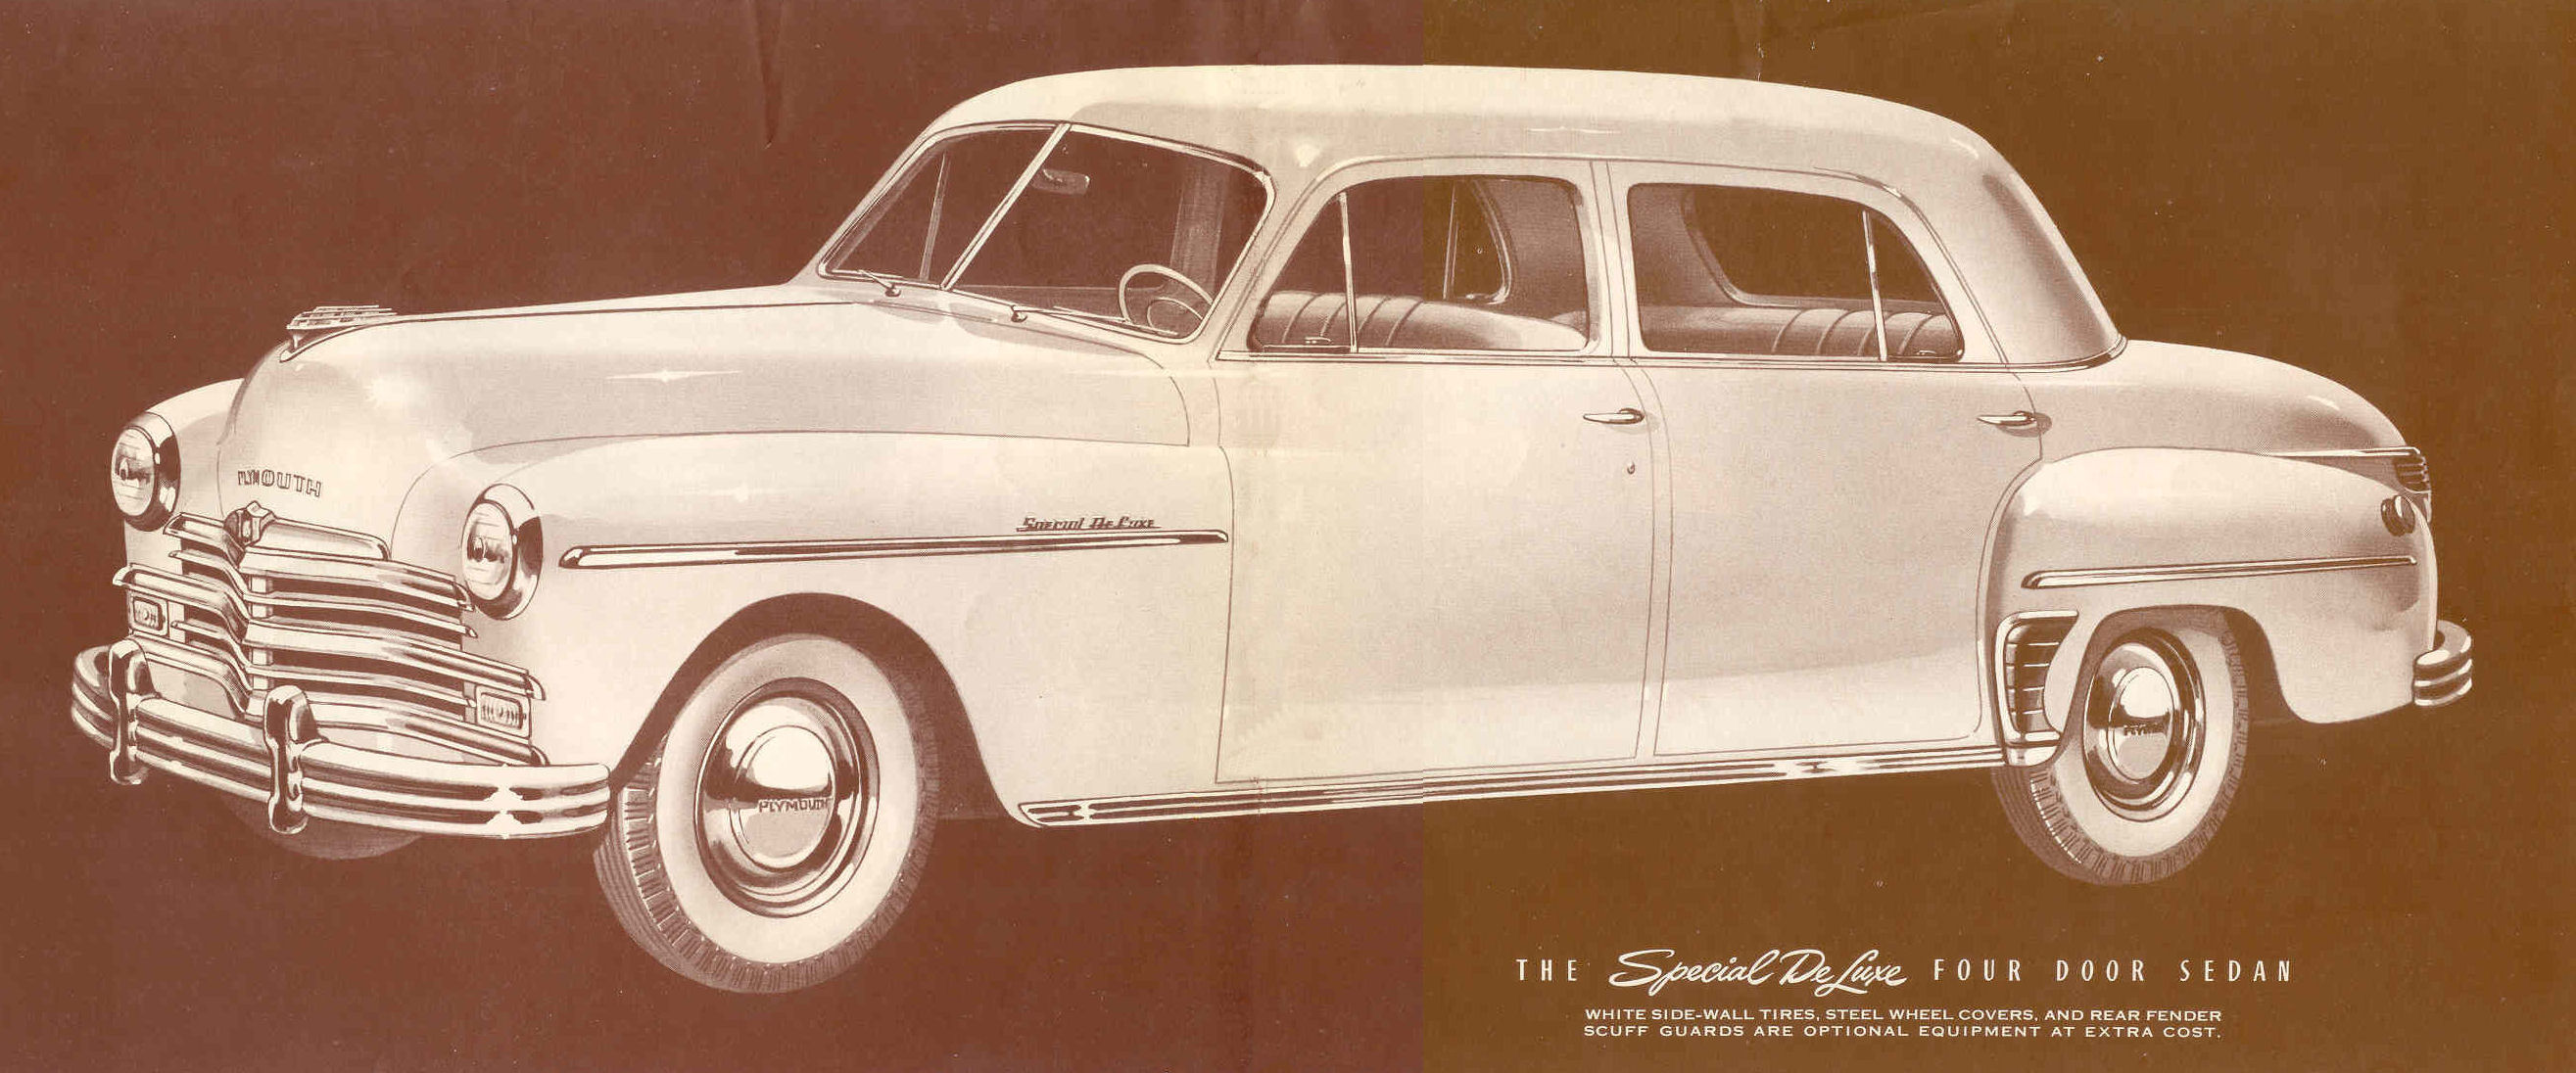 1949_Plymouth-03